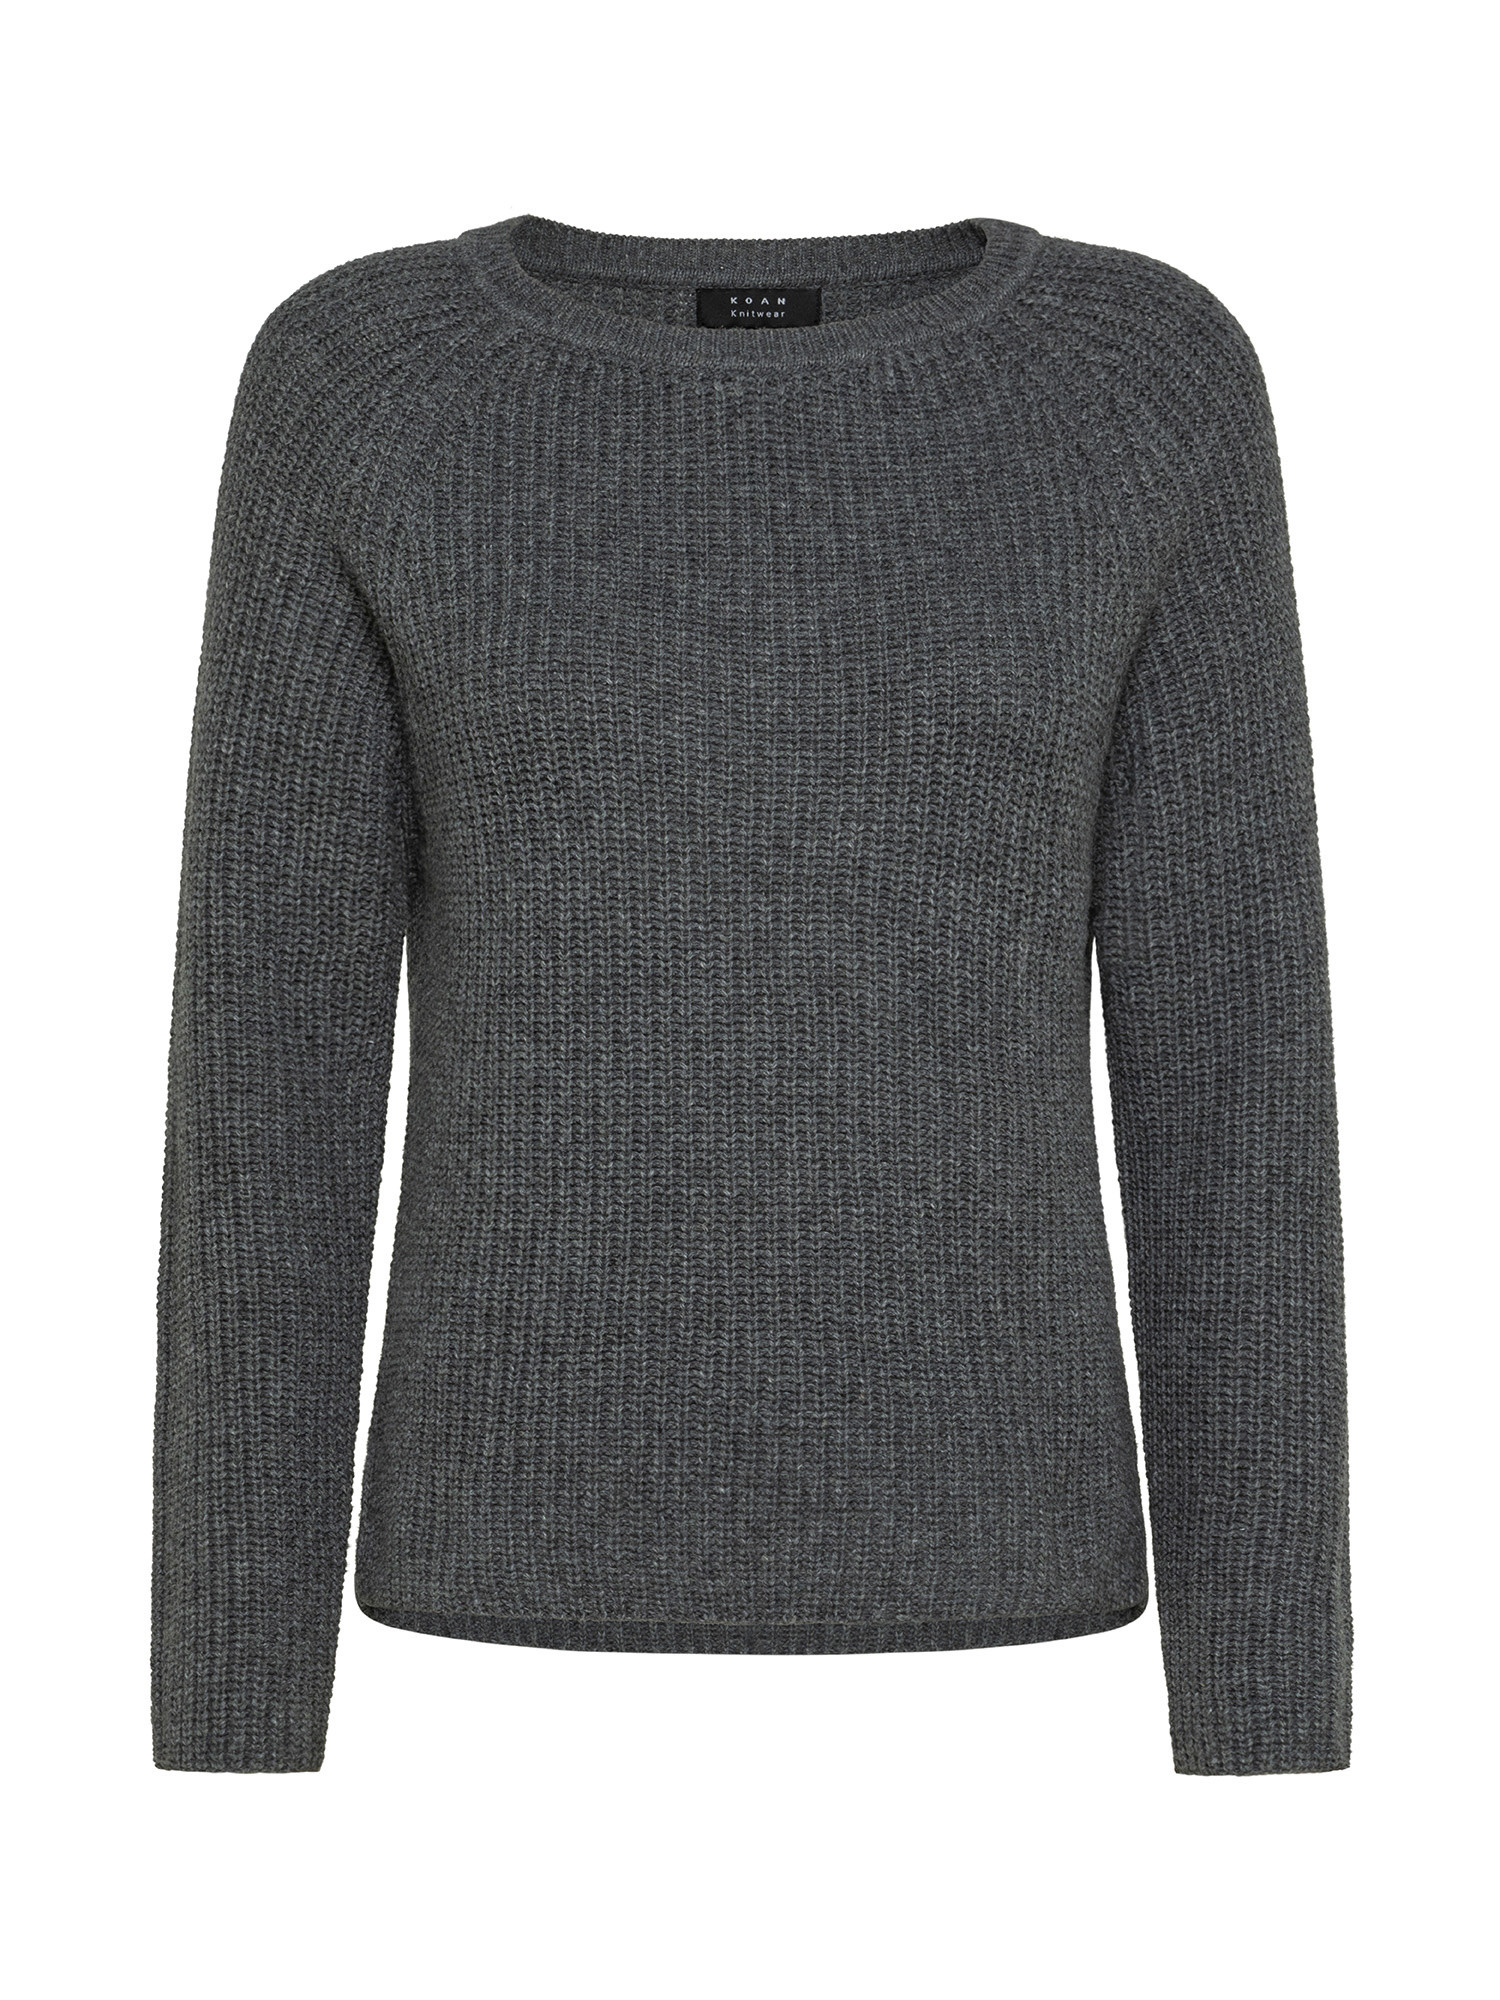 Koan - Ribbed pullover with boat neckline, Grey, large image number 0